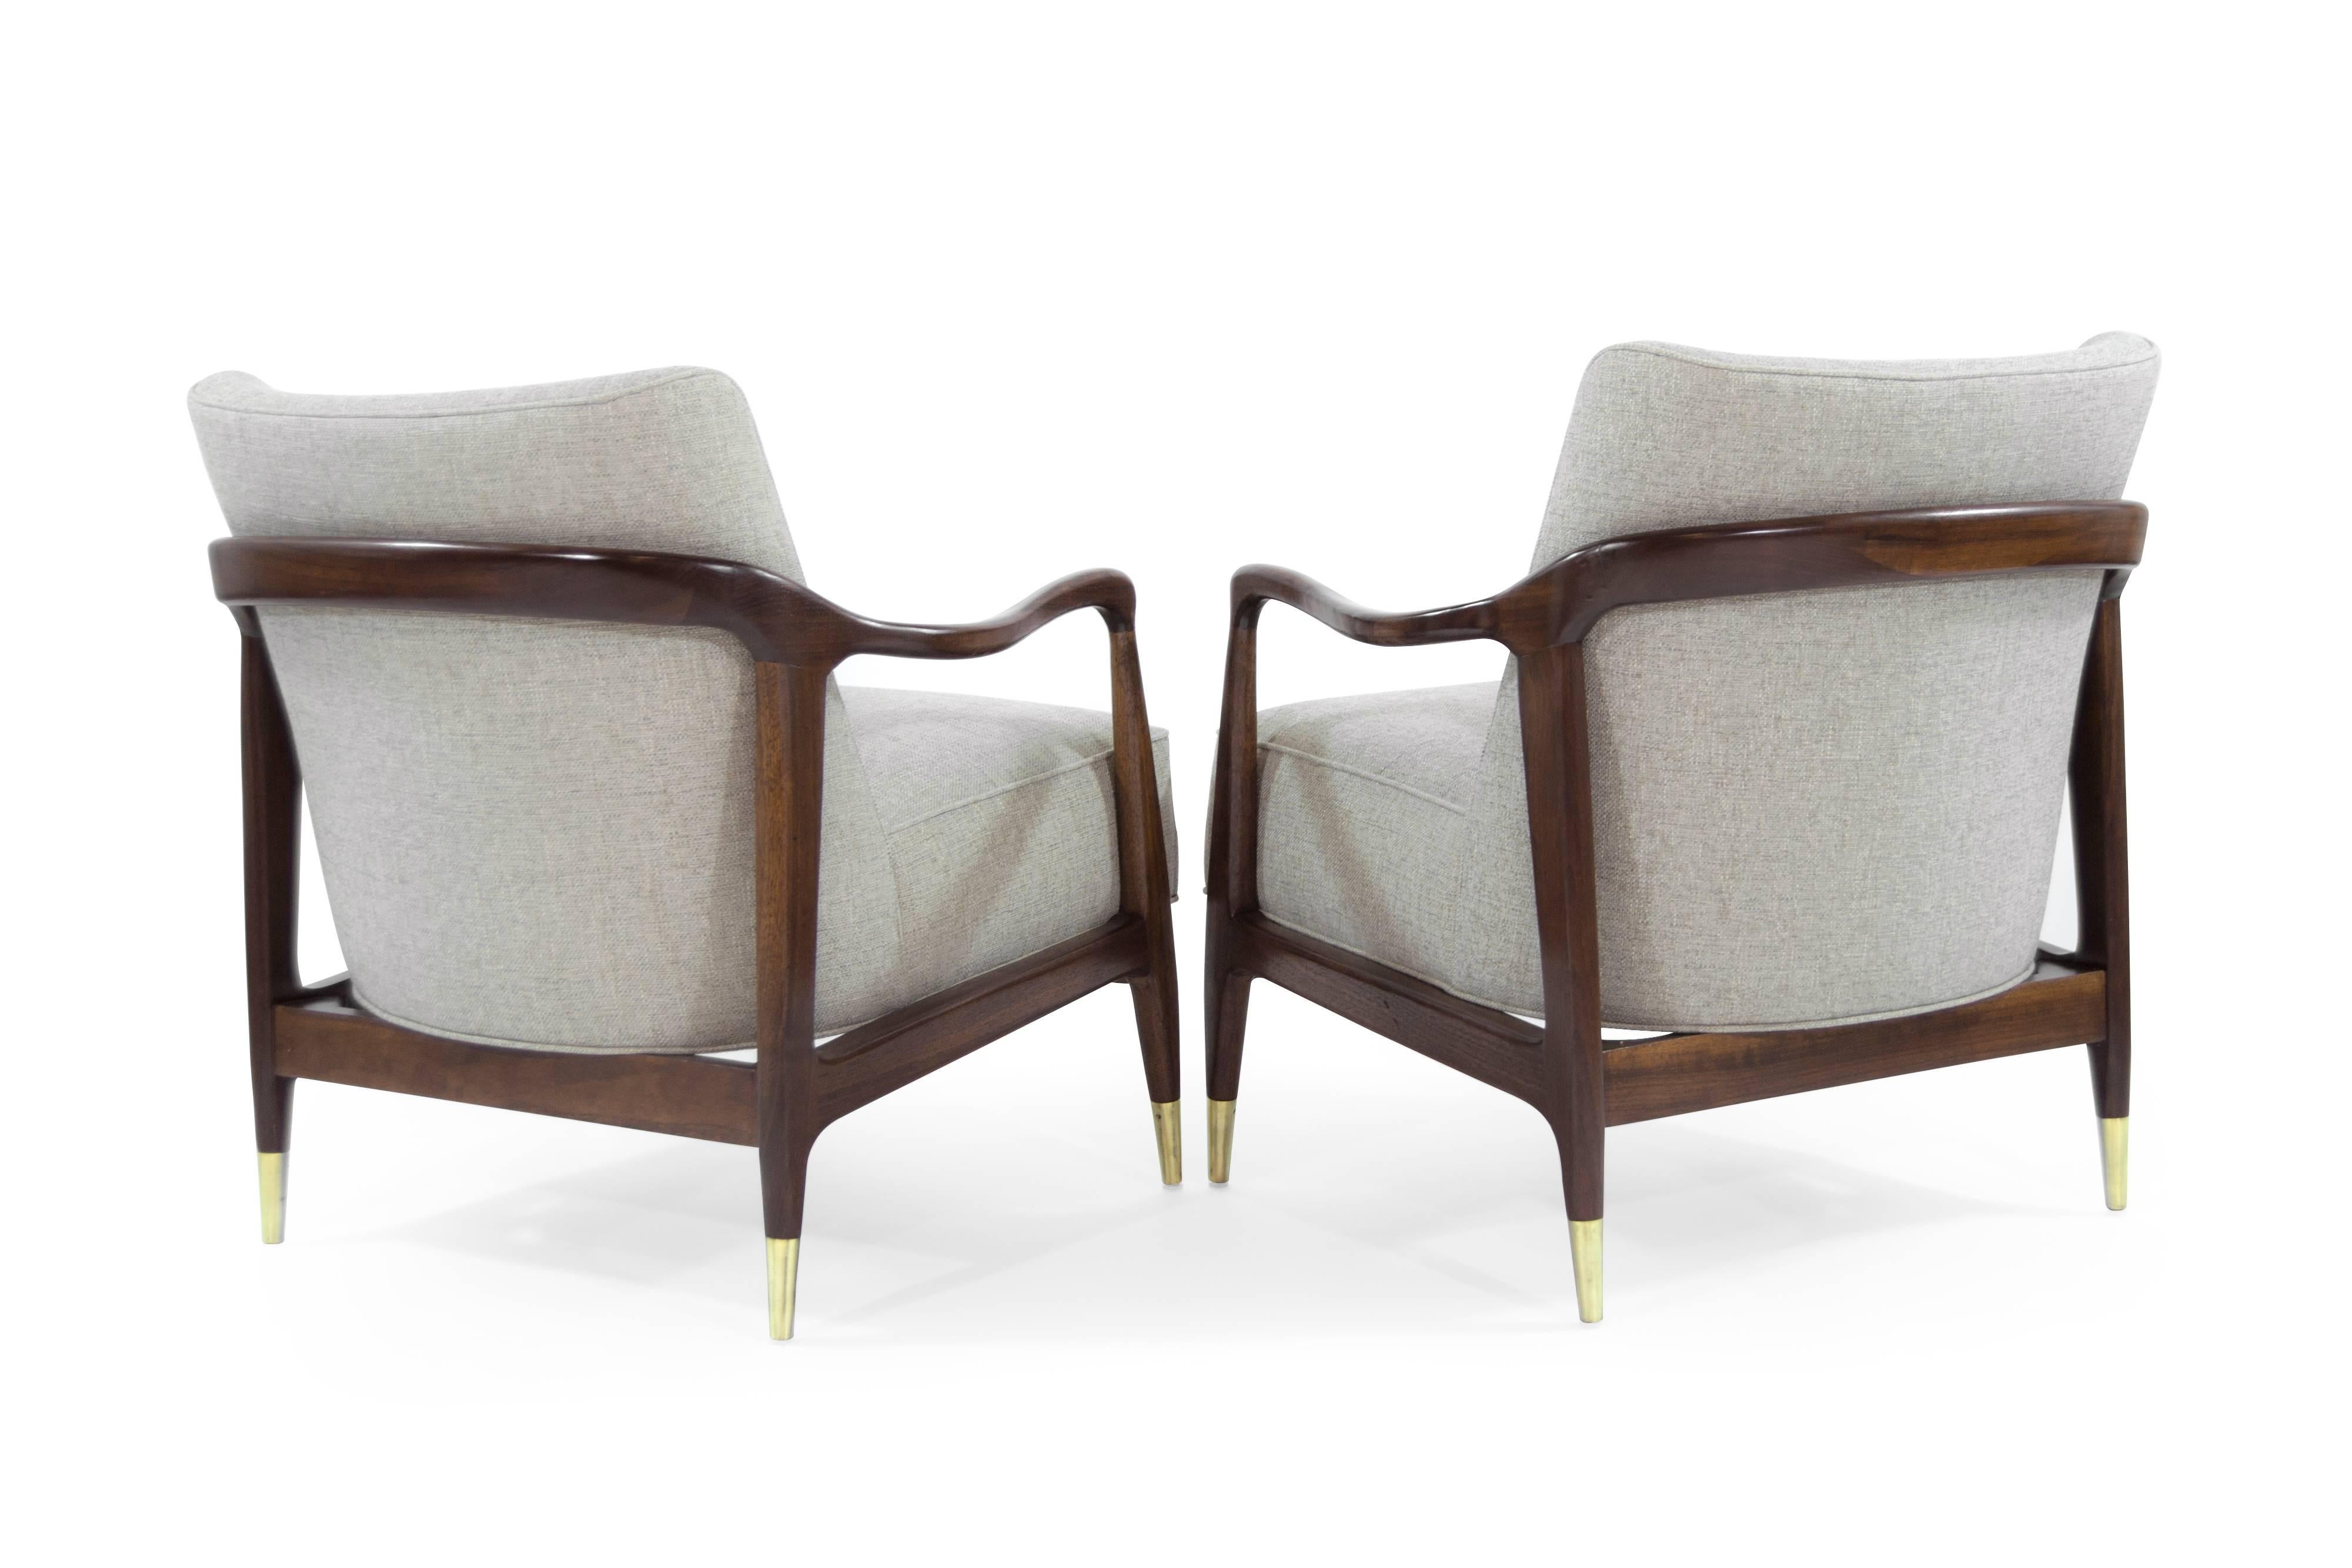 American Gio Ponti Style Sculptural Walnut Lounge Chairs